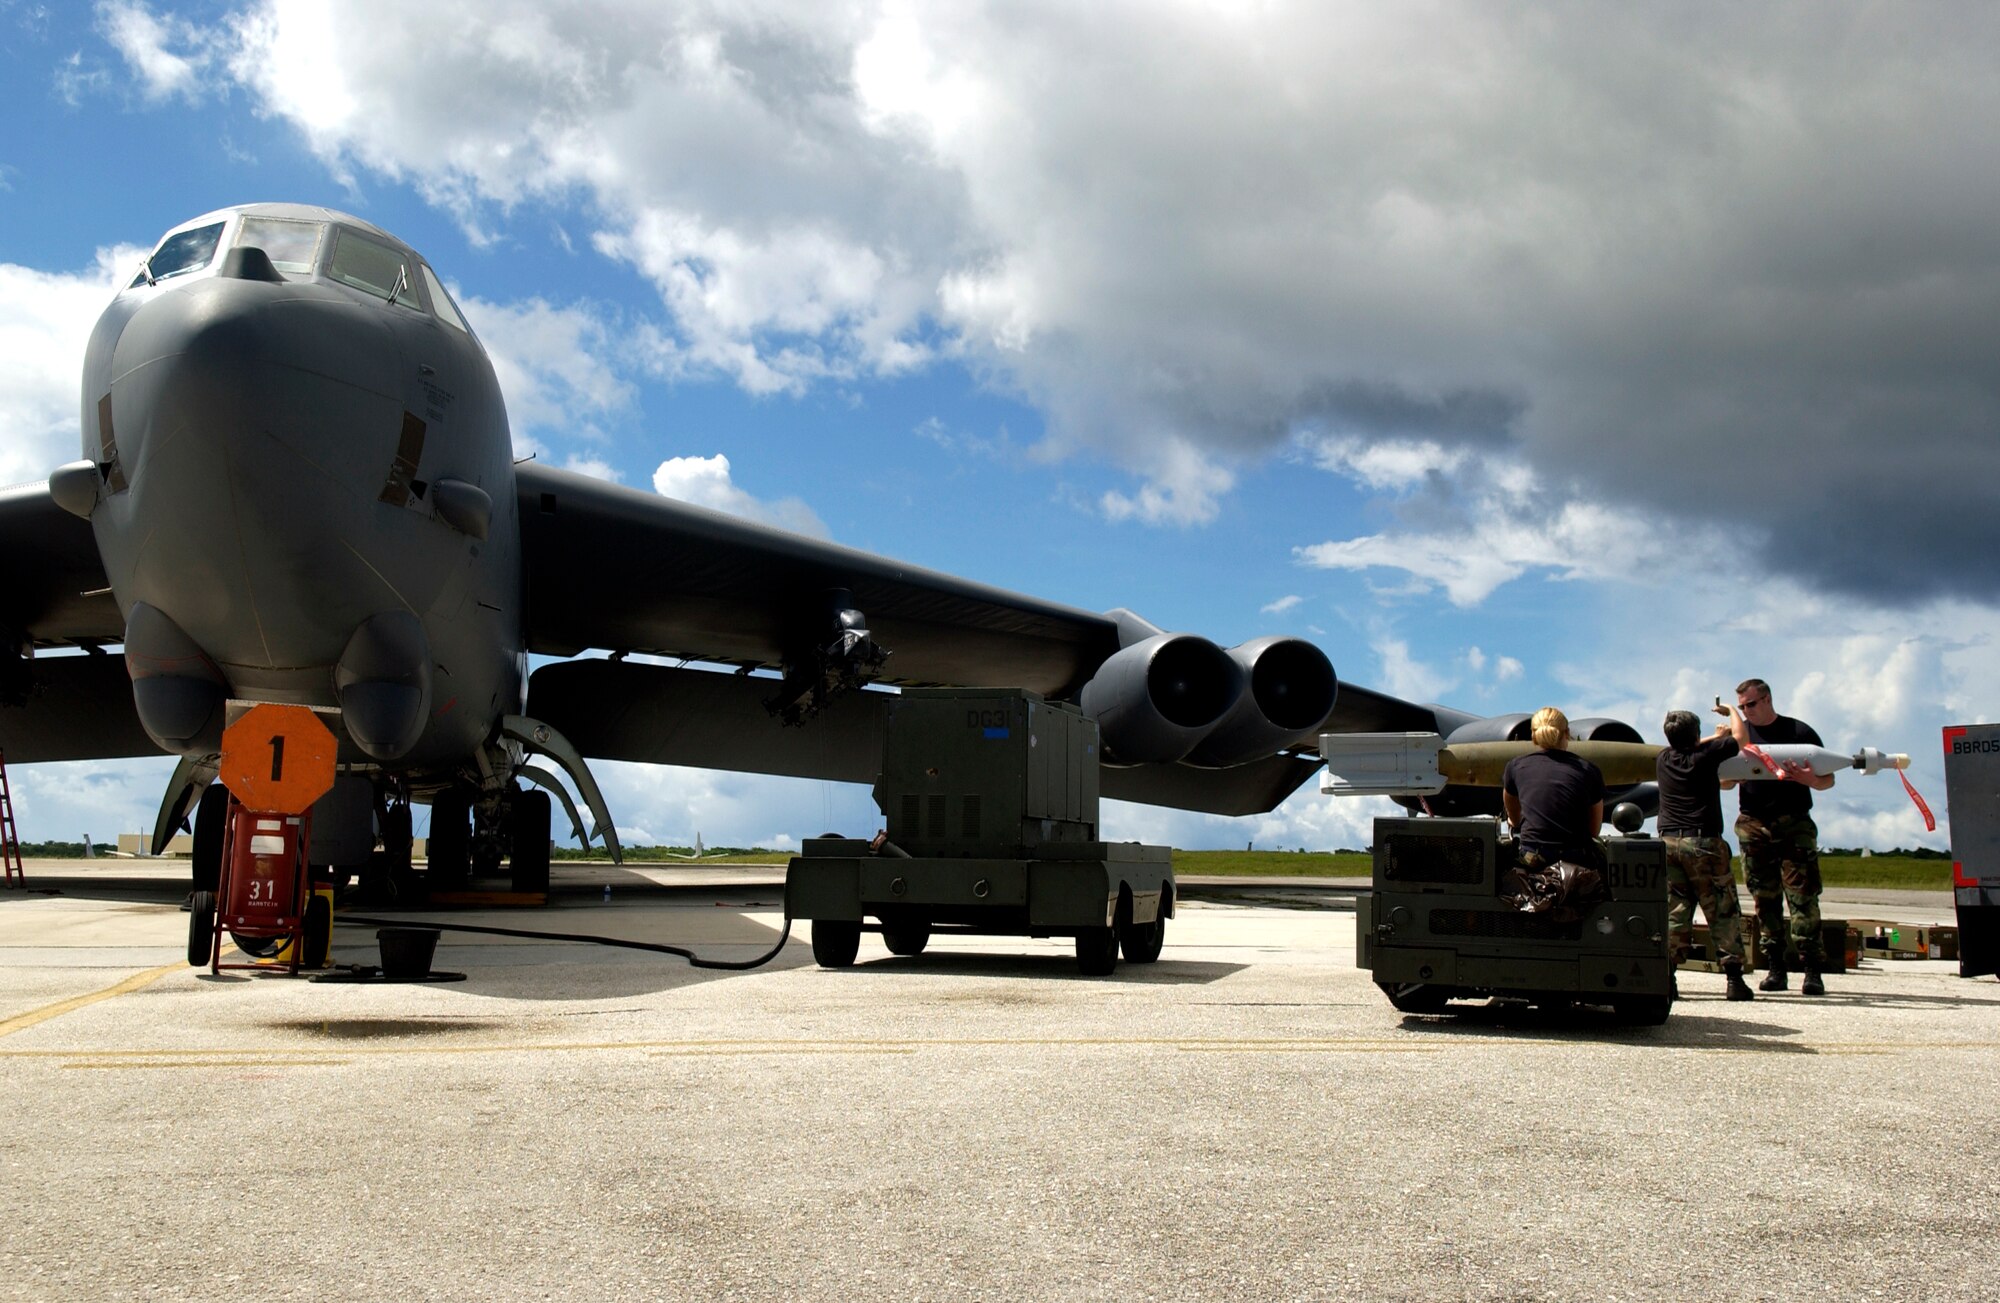 ANDERSEN AIR FORCE BASE, Guam - A weapons load team prepares to load a Guided Bomb Unit -12 onto a B-52 before a mission as part of Valiant Shield 2007 Aug. 6, 2007.  During the exercise, U.S. Air Force aircraft and personnel from stateside bases and Kadena Air Base, Japan, work together as part of an expeditionary air wing based at Andersen AFB, Guam. Andersen AFB will also be the beddown location for approximately 64 U.S. Air Force and 29 U.S. Navy aircraft, plus transient aircraft, during Valiant Shield. Valiant Shield 07, the largest joint exercise in recent history, includes 30 ships, more than 280 aircraft and more than 20,000 service members from the Navy, Marine Corps, Air Force and Coast Guard. (U.S. Air Force photo by Senior Airman Miranda Moorer)